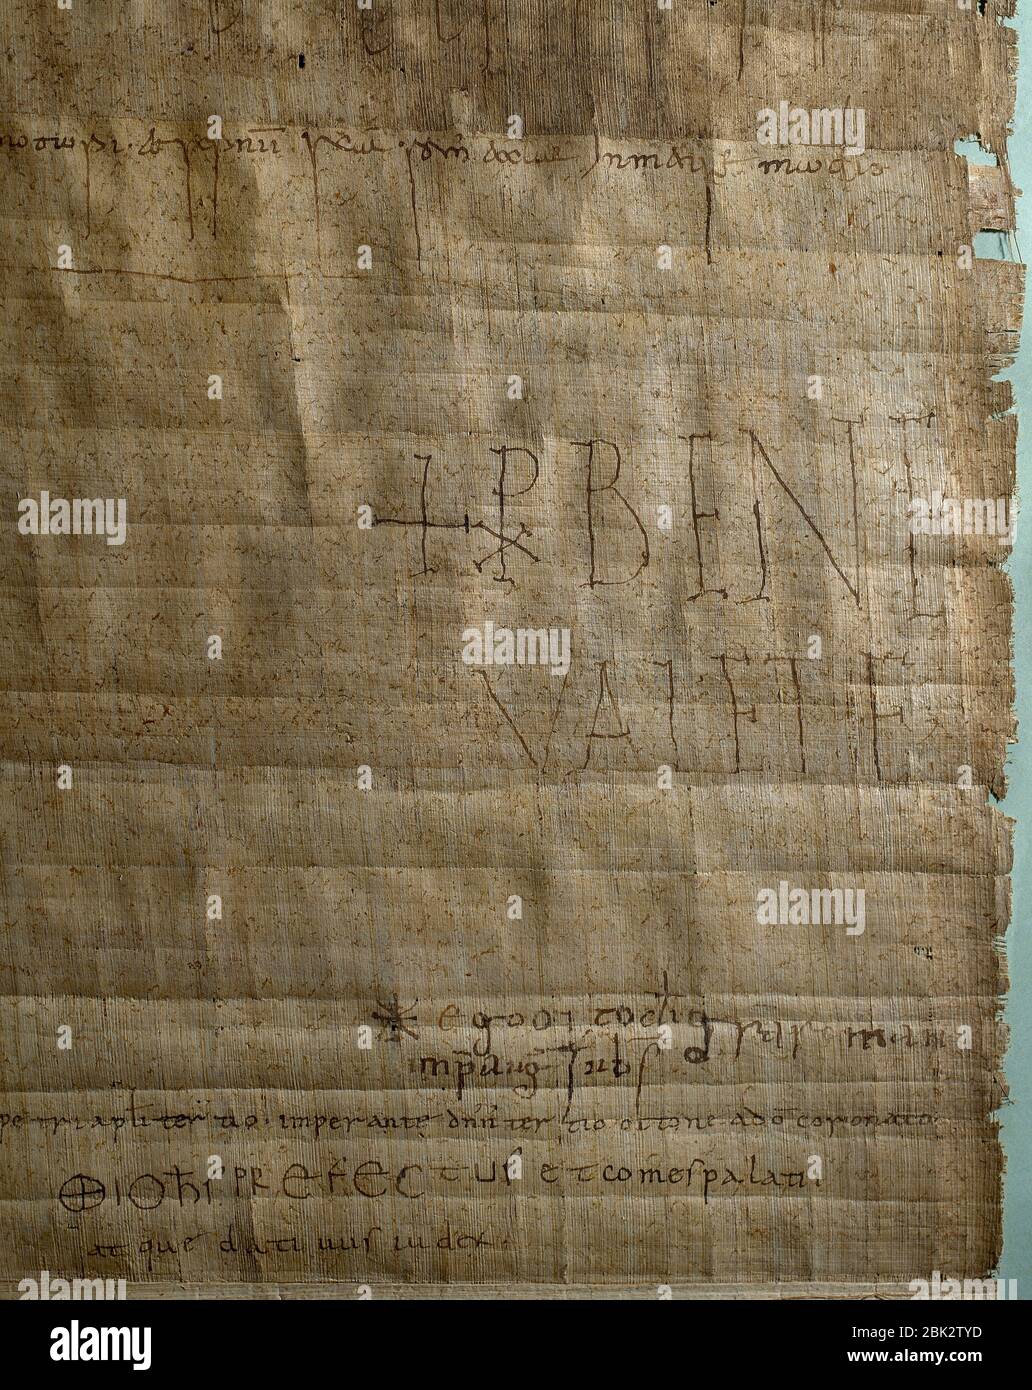 Pope Gregory V (972-999). Papal Bull notifying that in the synod celebrated on May 9 , 998 in the Basilica of St. Peter the Vatican, in the presence of emperor Otton III and the Count Armengol (First of Urgel). Bishop Intruder Guadall is dismissed from see of Osona and the legitimate one, Bishop Arnulfo, is confirmed. Final part of the document and signature. Archive of the Cathedral of Vic, Barcelona province, Catalonia, Spain. Stock Photo